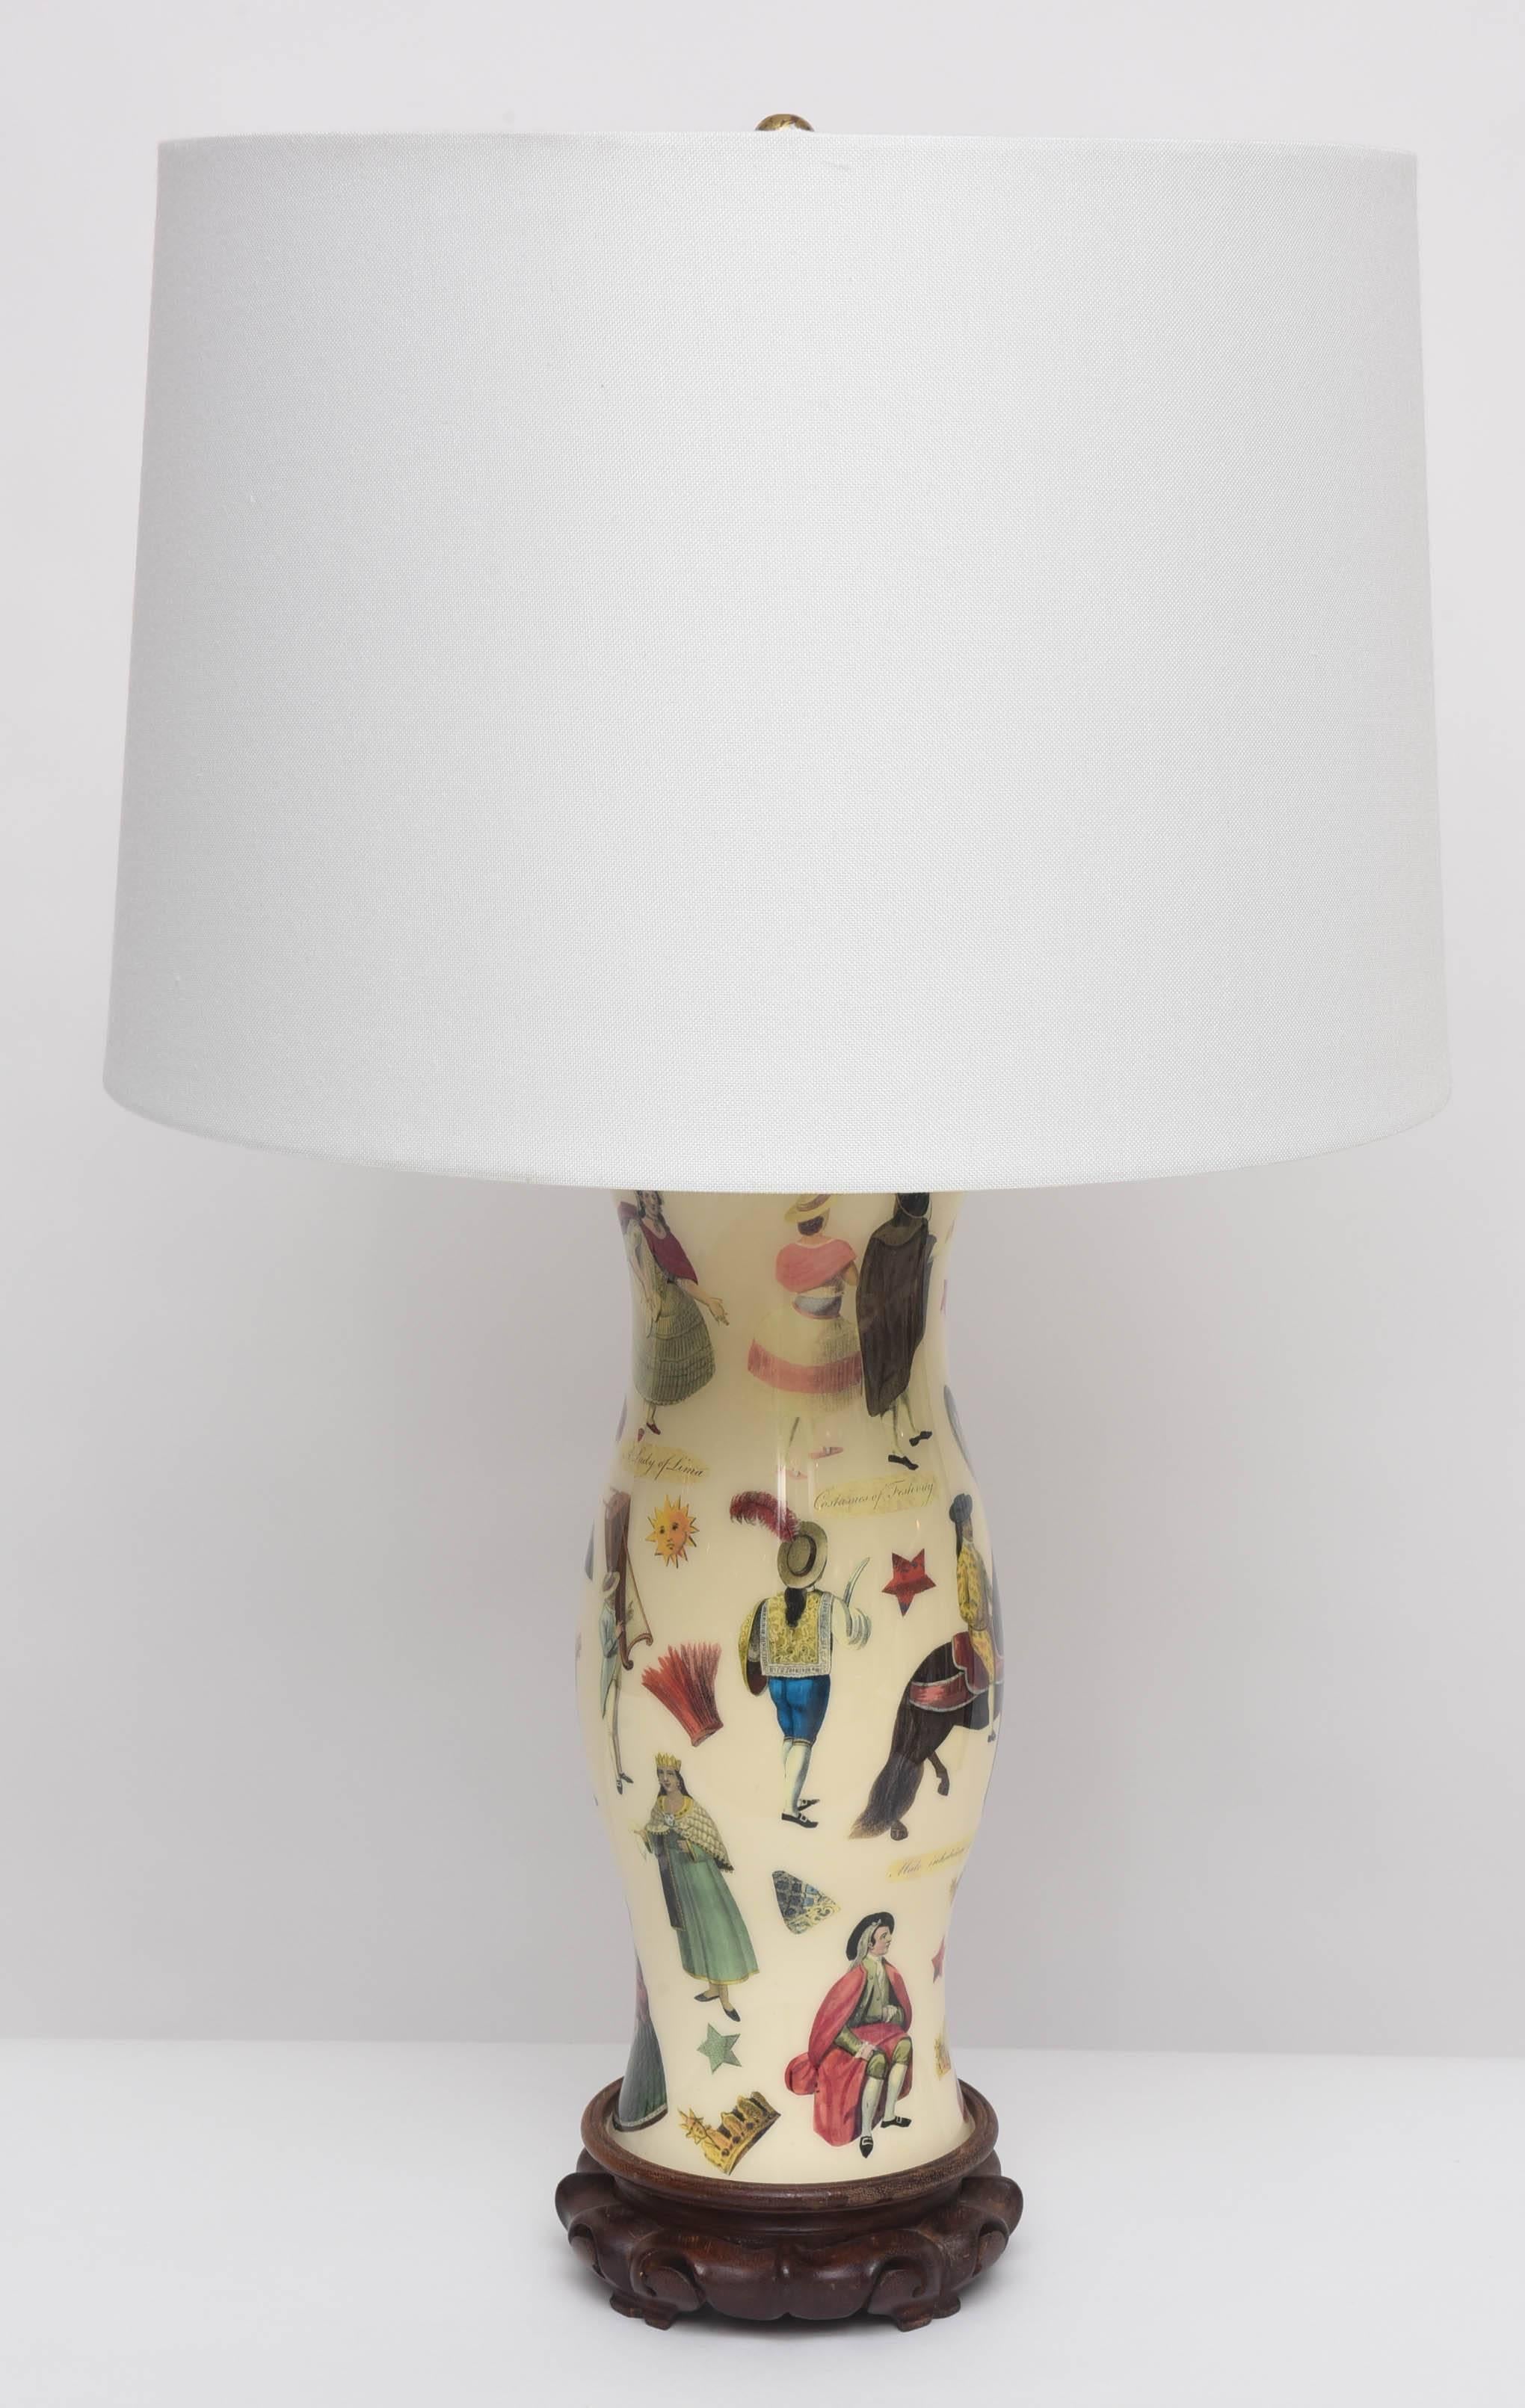 This wonderful and whimsical pair of 1960s decoupage lamps from a Palm Beach estate has a Spanish colonial theme with pastel-hued transfer prints of Peruvian grandees, fashionable women of Lima, native Incans, and llamas on a cream background. Brass